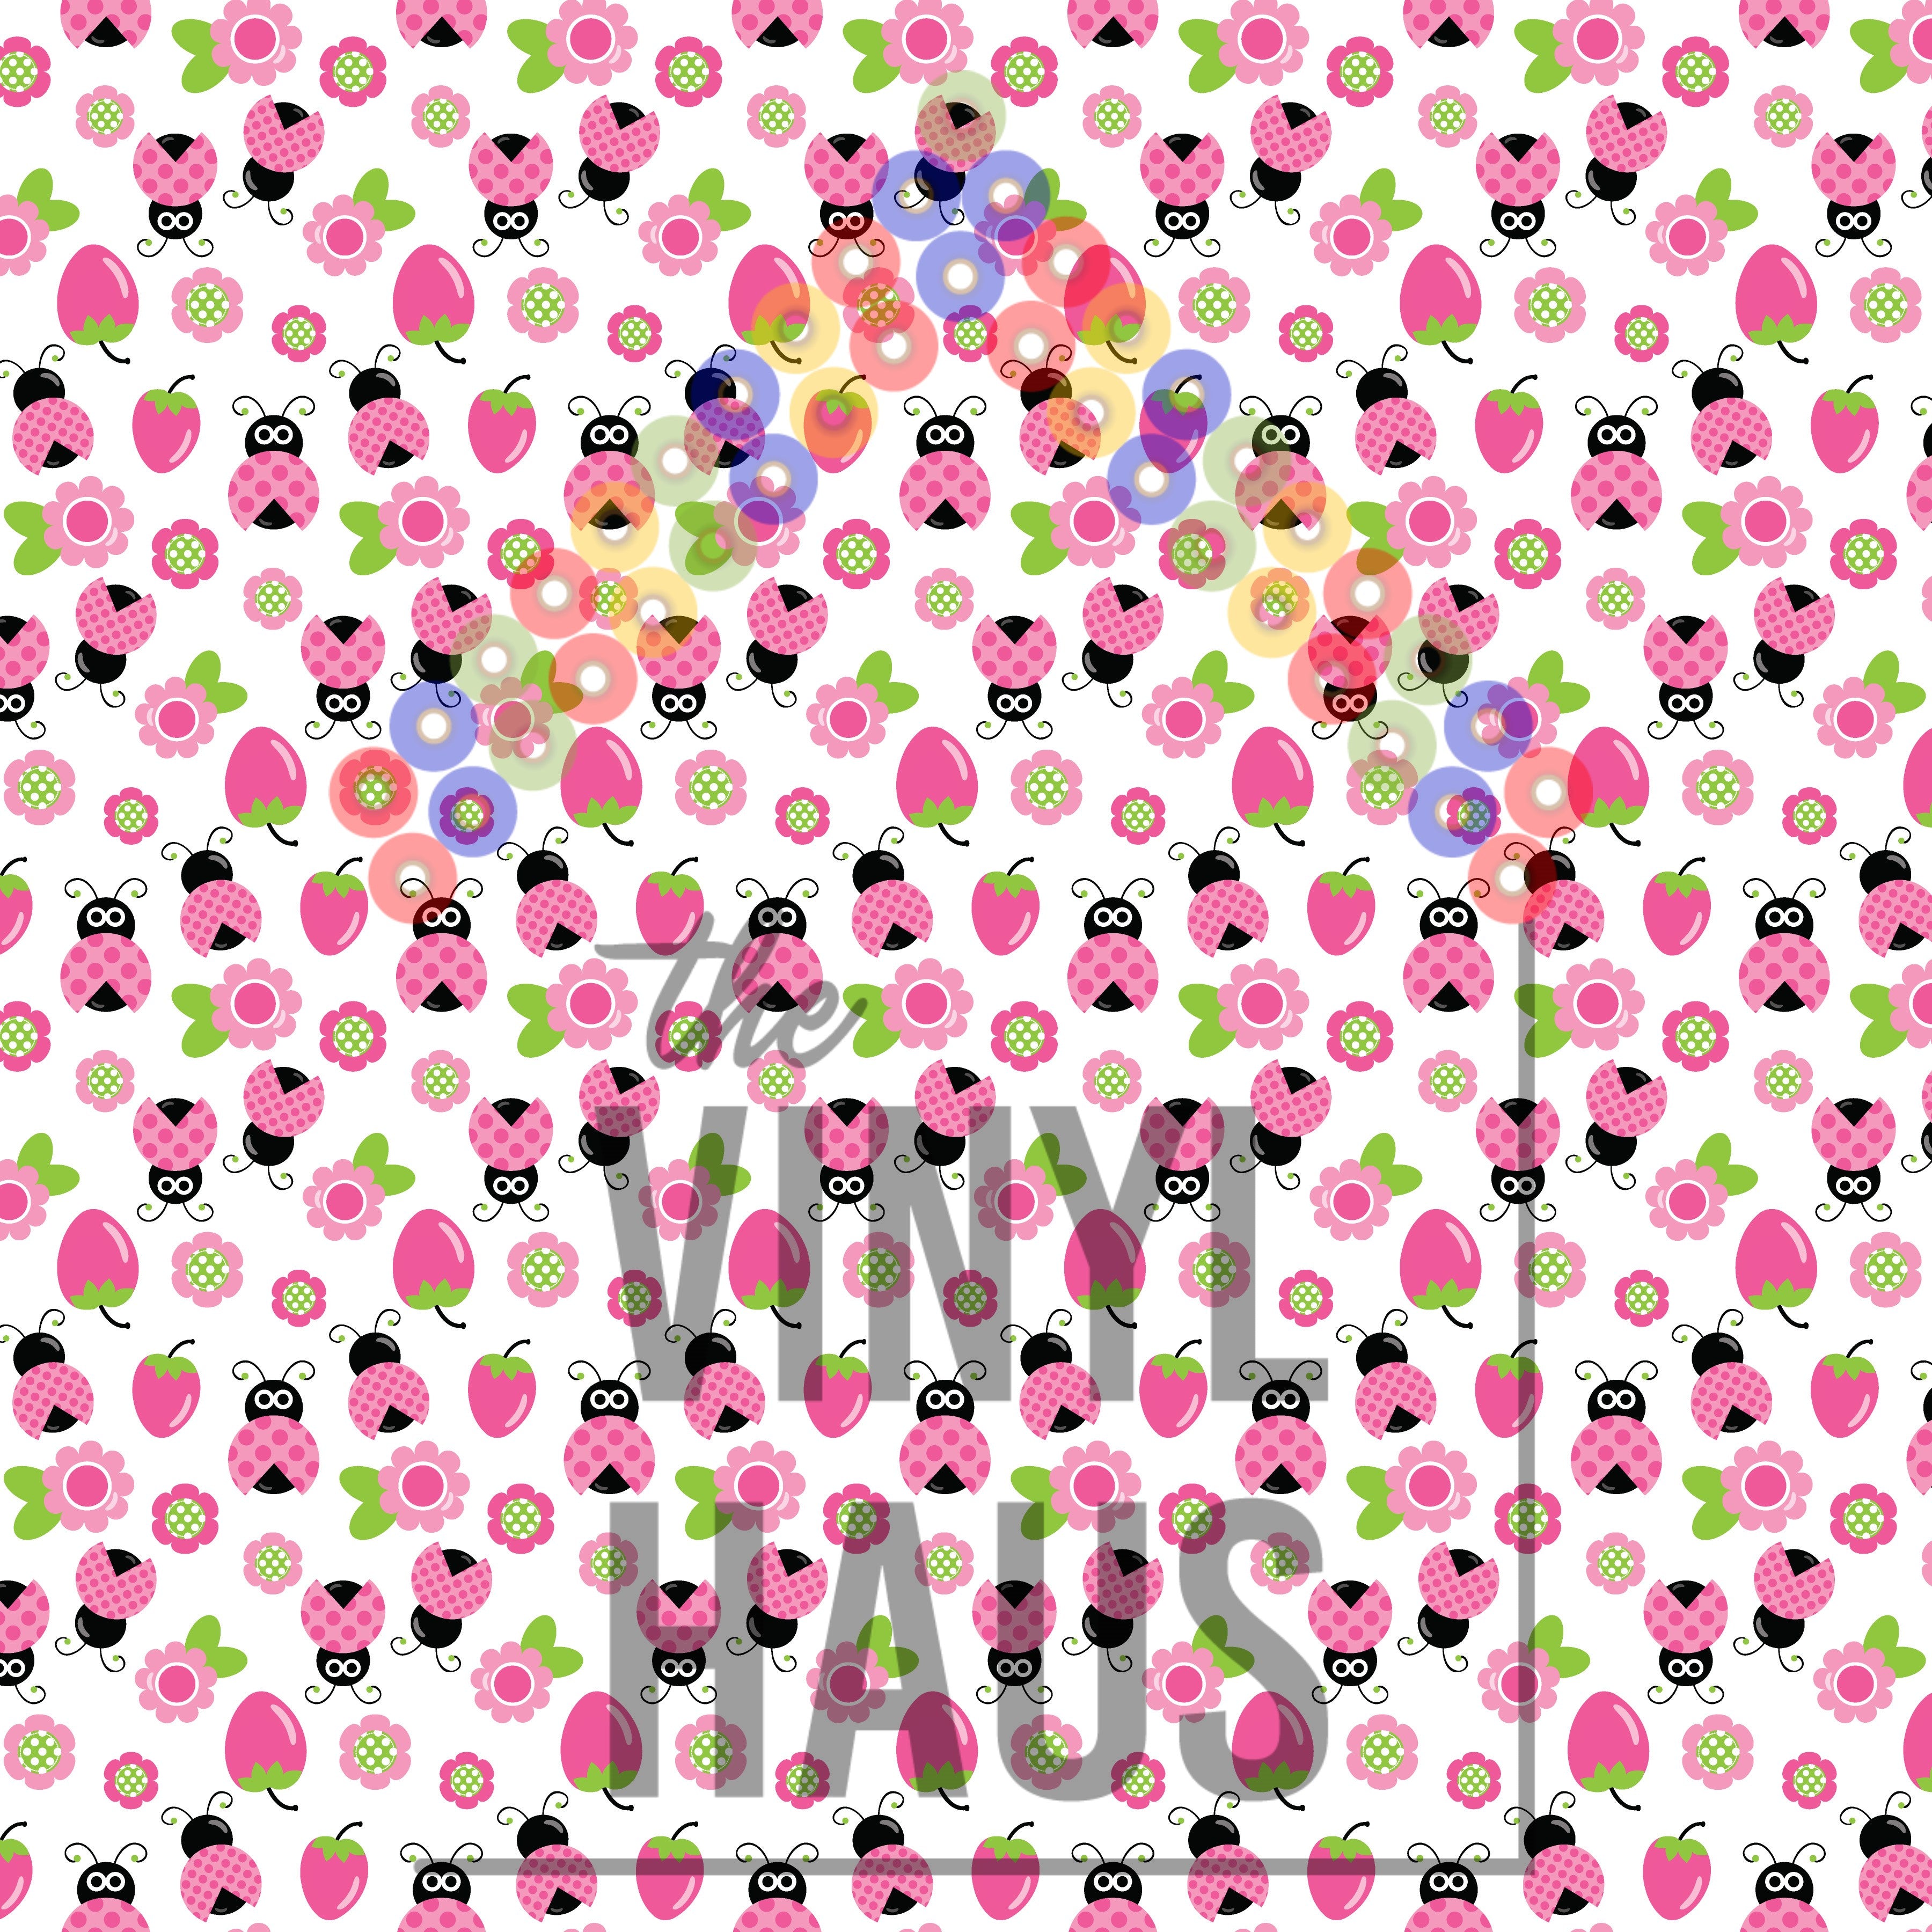 Pink Ladybugs and Flowers White Background Pattern Vinyl 12" x 9" - The Vinyl Haus